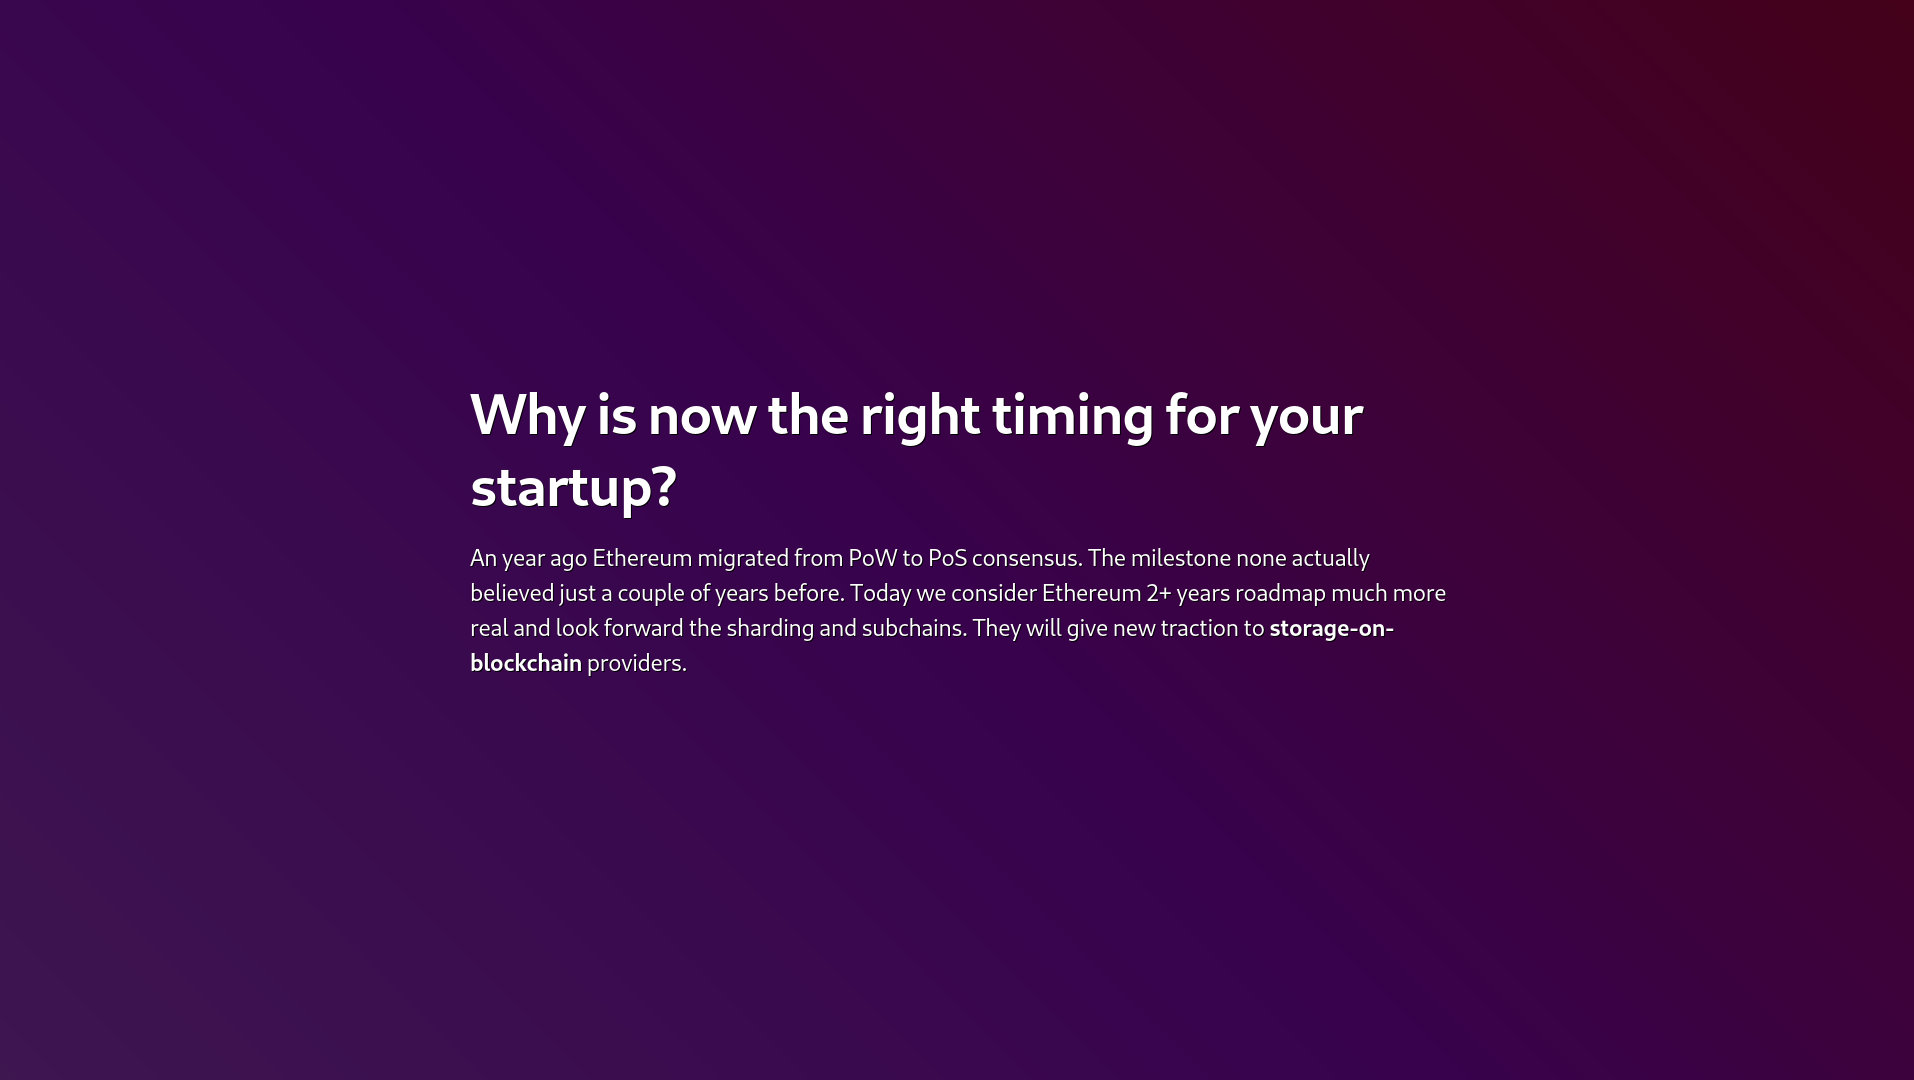 Why is now the right timing for your startup?